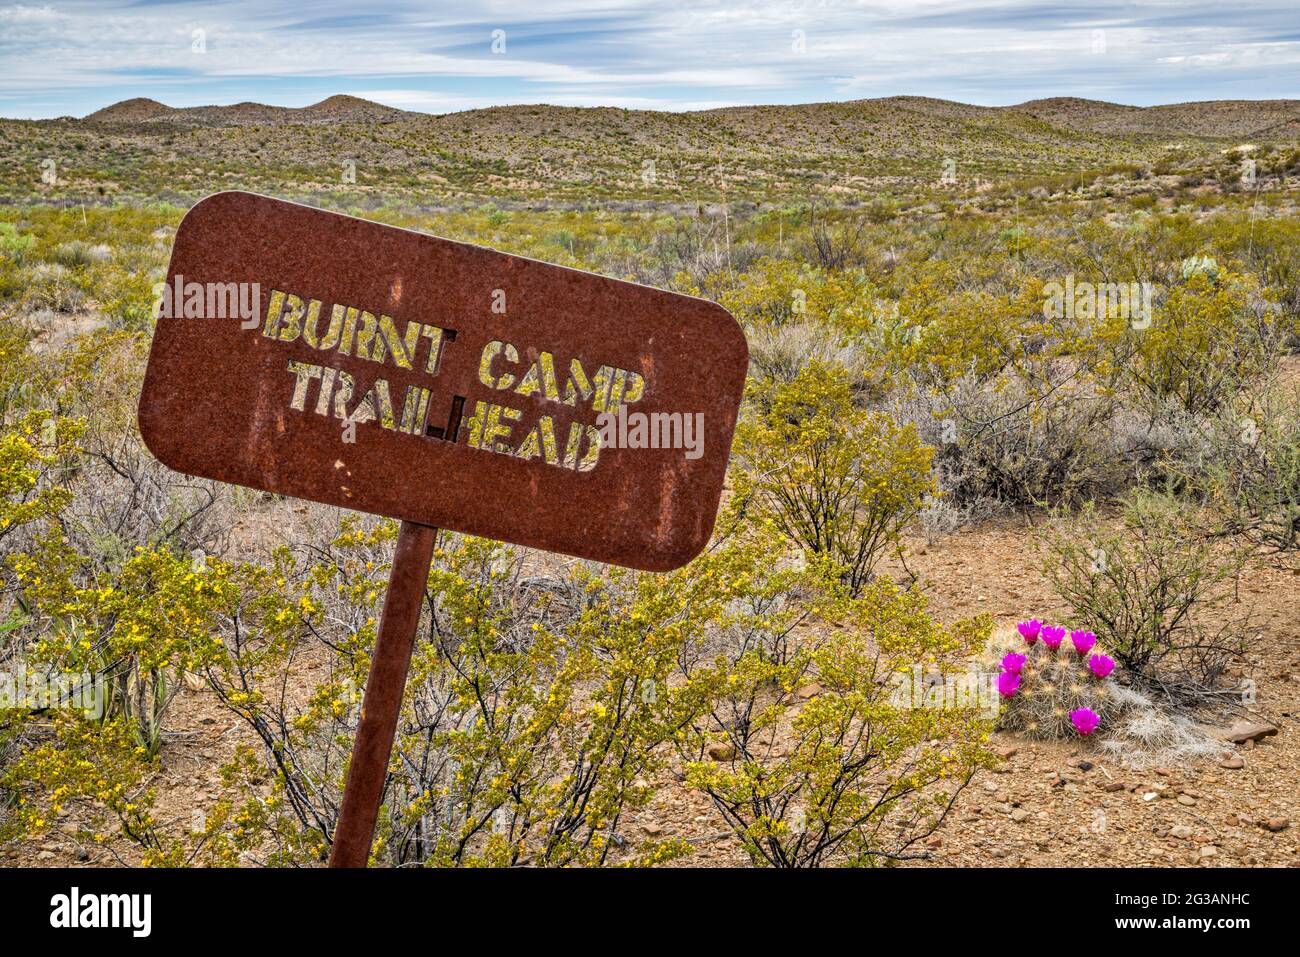 Metal trail sign, blooming strawberry cactus, at Burnt Camp Trailhead, El Solitario area, Big Bend Ranch State Park, Texas, USA Stock Photo